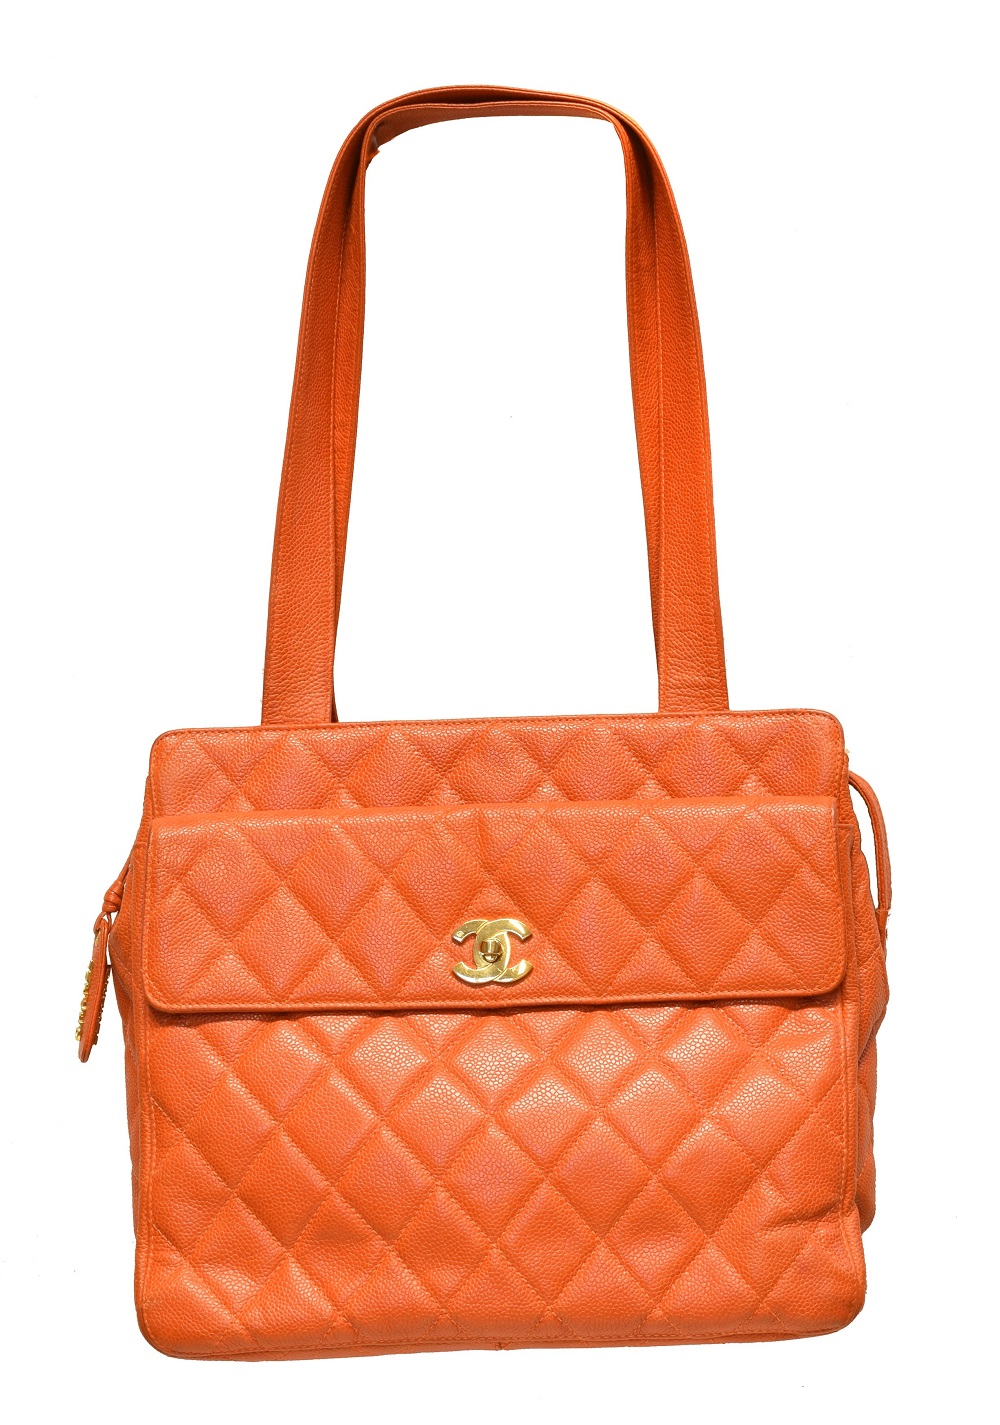 A Chanel Front Pocket Turnlock Tote Shoulder Bag, circa 1996-7, the orange quilted caviar calf leather exterior with orange leather strap and gold tone hardware, serial no. 4112158. With maker's authenticity card.  (Qty: 1)  30x25x10cm  Sold for £1,049